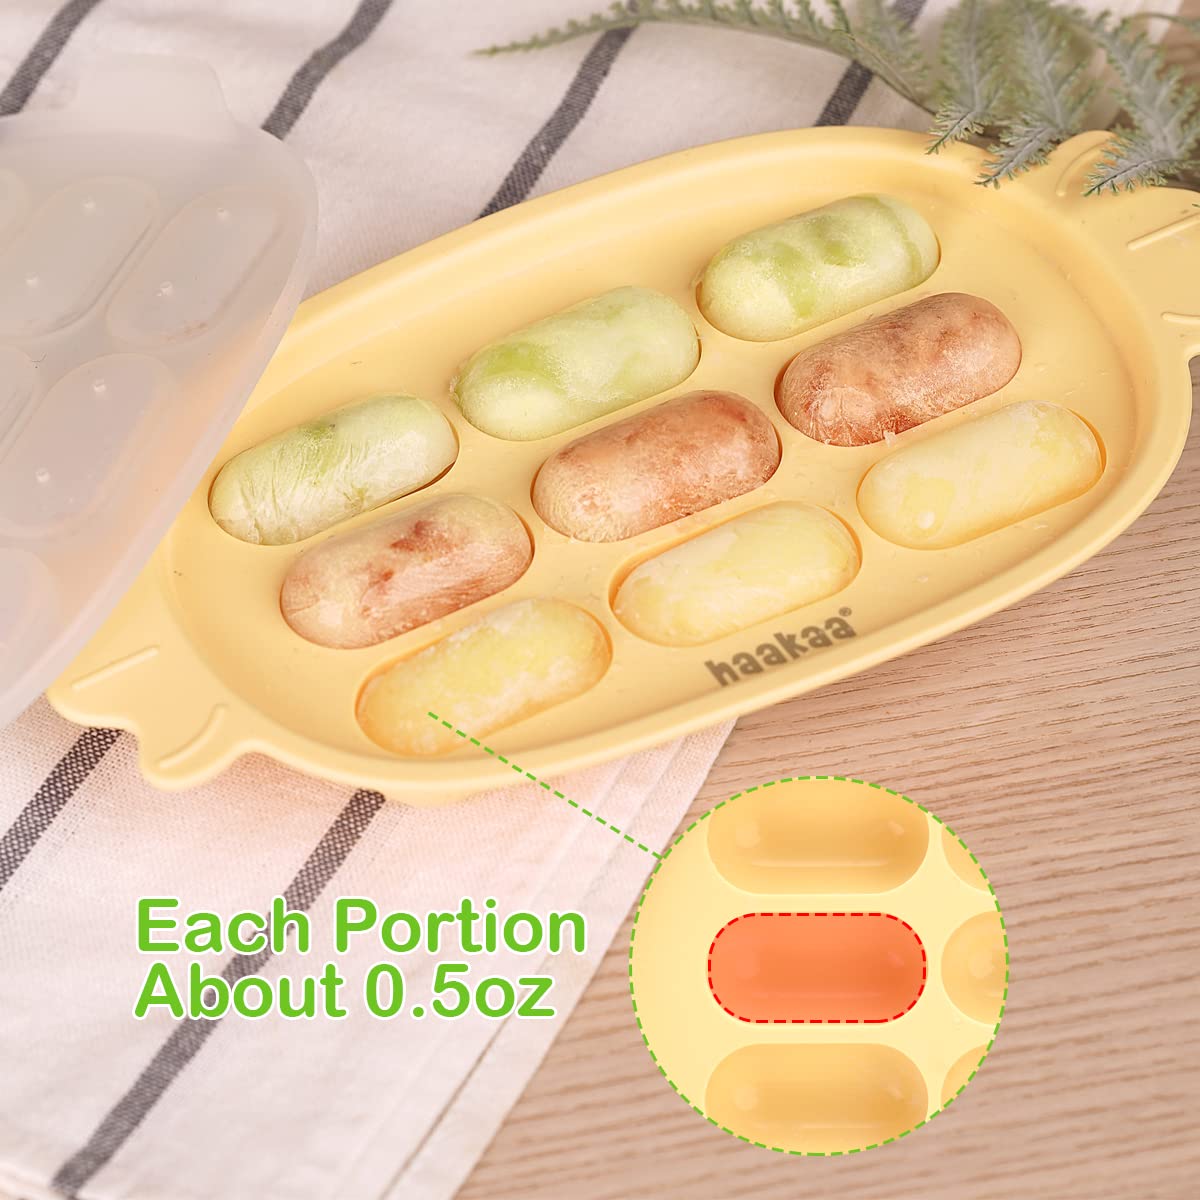 Haakaa Baby Fruit Food Feeder & Silicone Nibble Tray Combo - Breastmilk Popsicle Mold for Baby Cooling Relief, BPA Free Baby Mesh Feeder for Infant Self Feeding : Baby